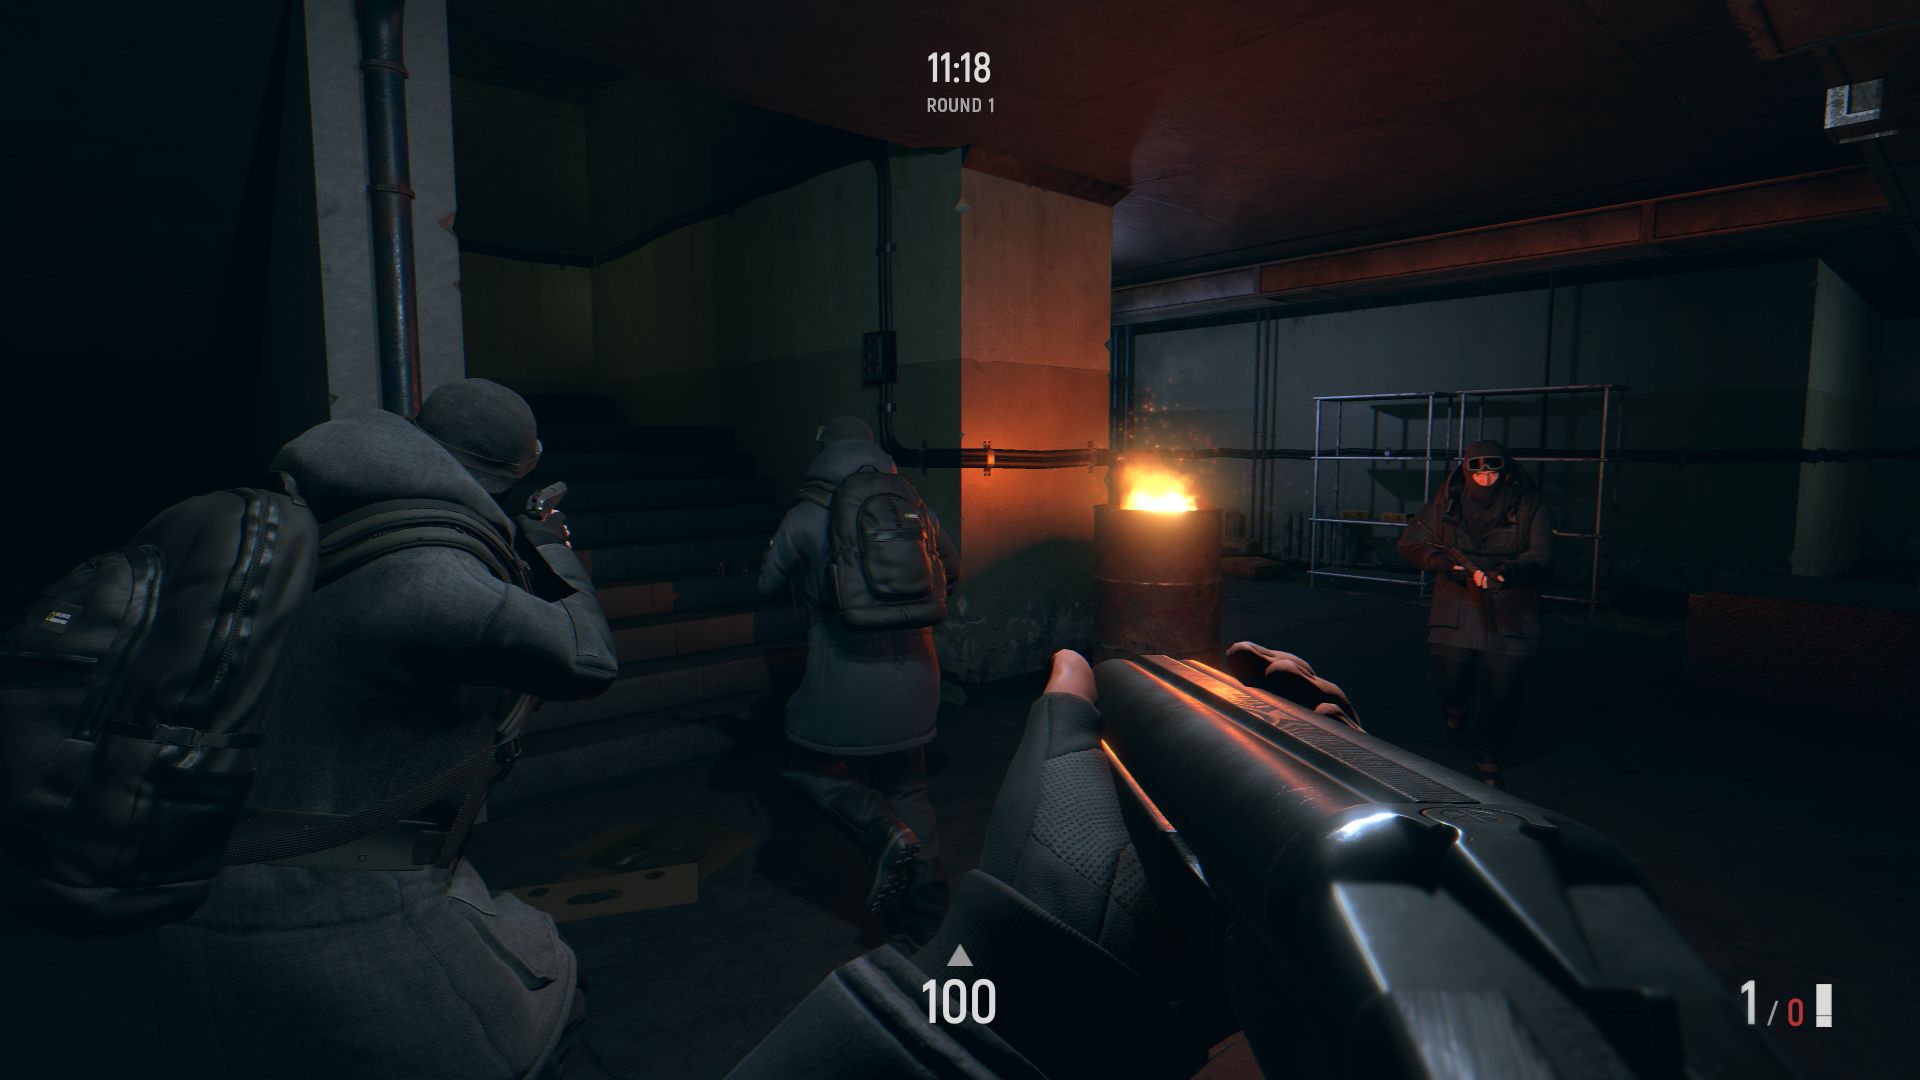 DEAD DOZEN Multiplayer Action Horror Game Releases Steam Early Access